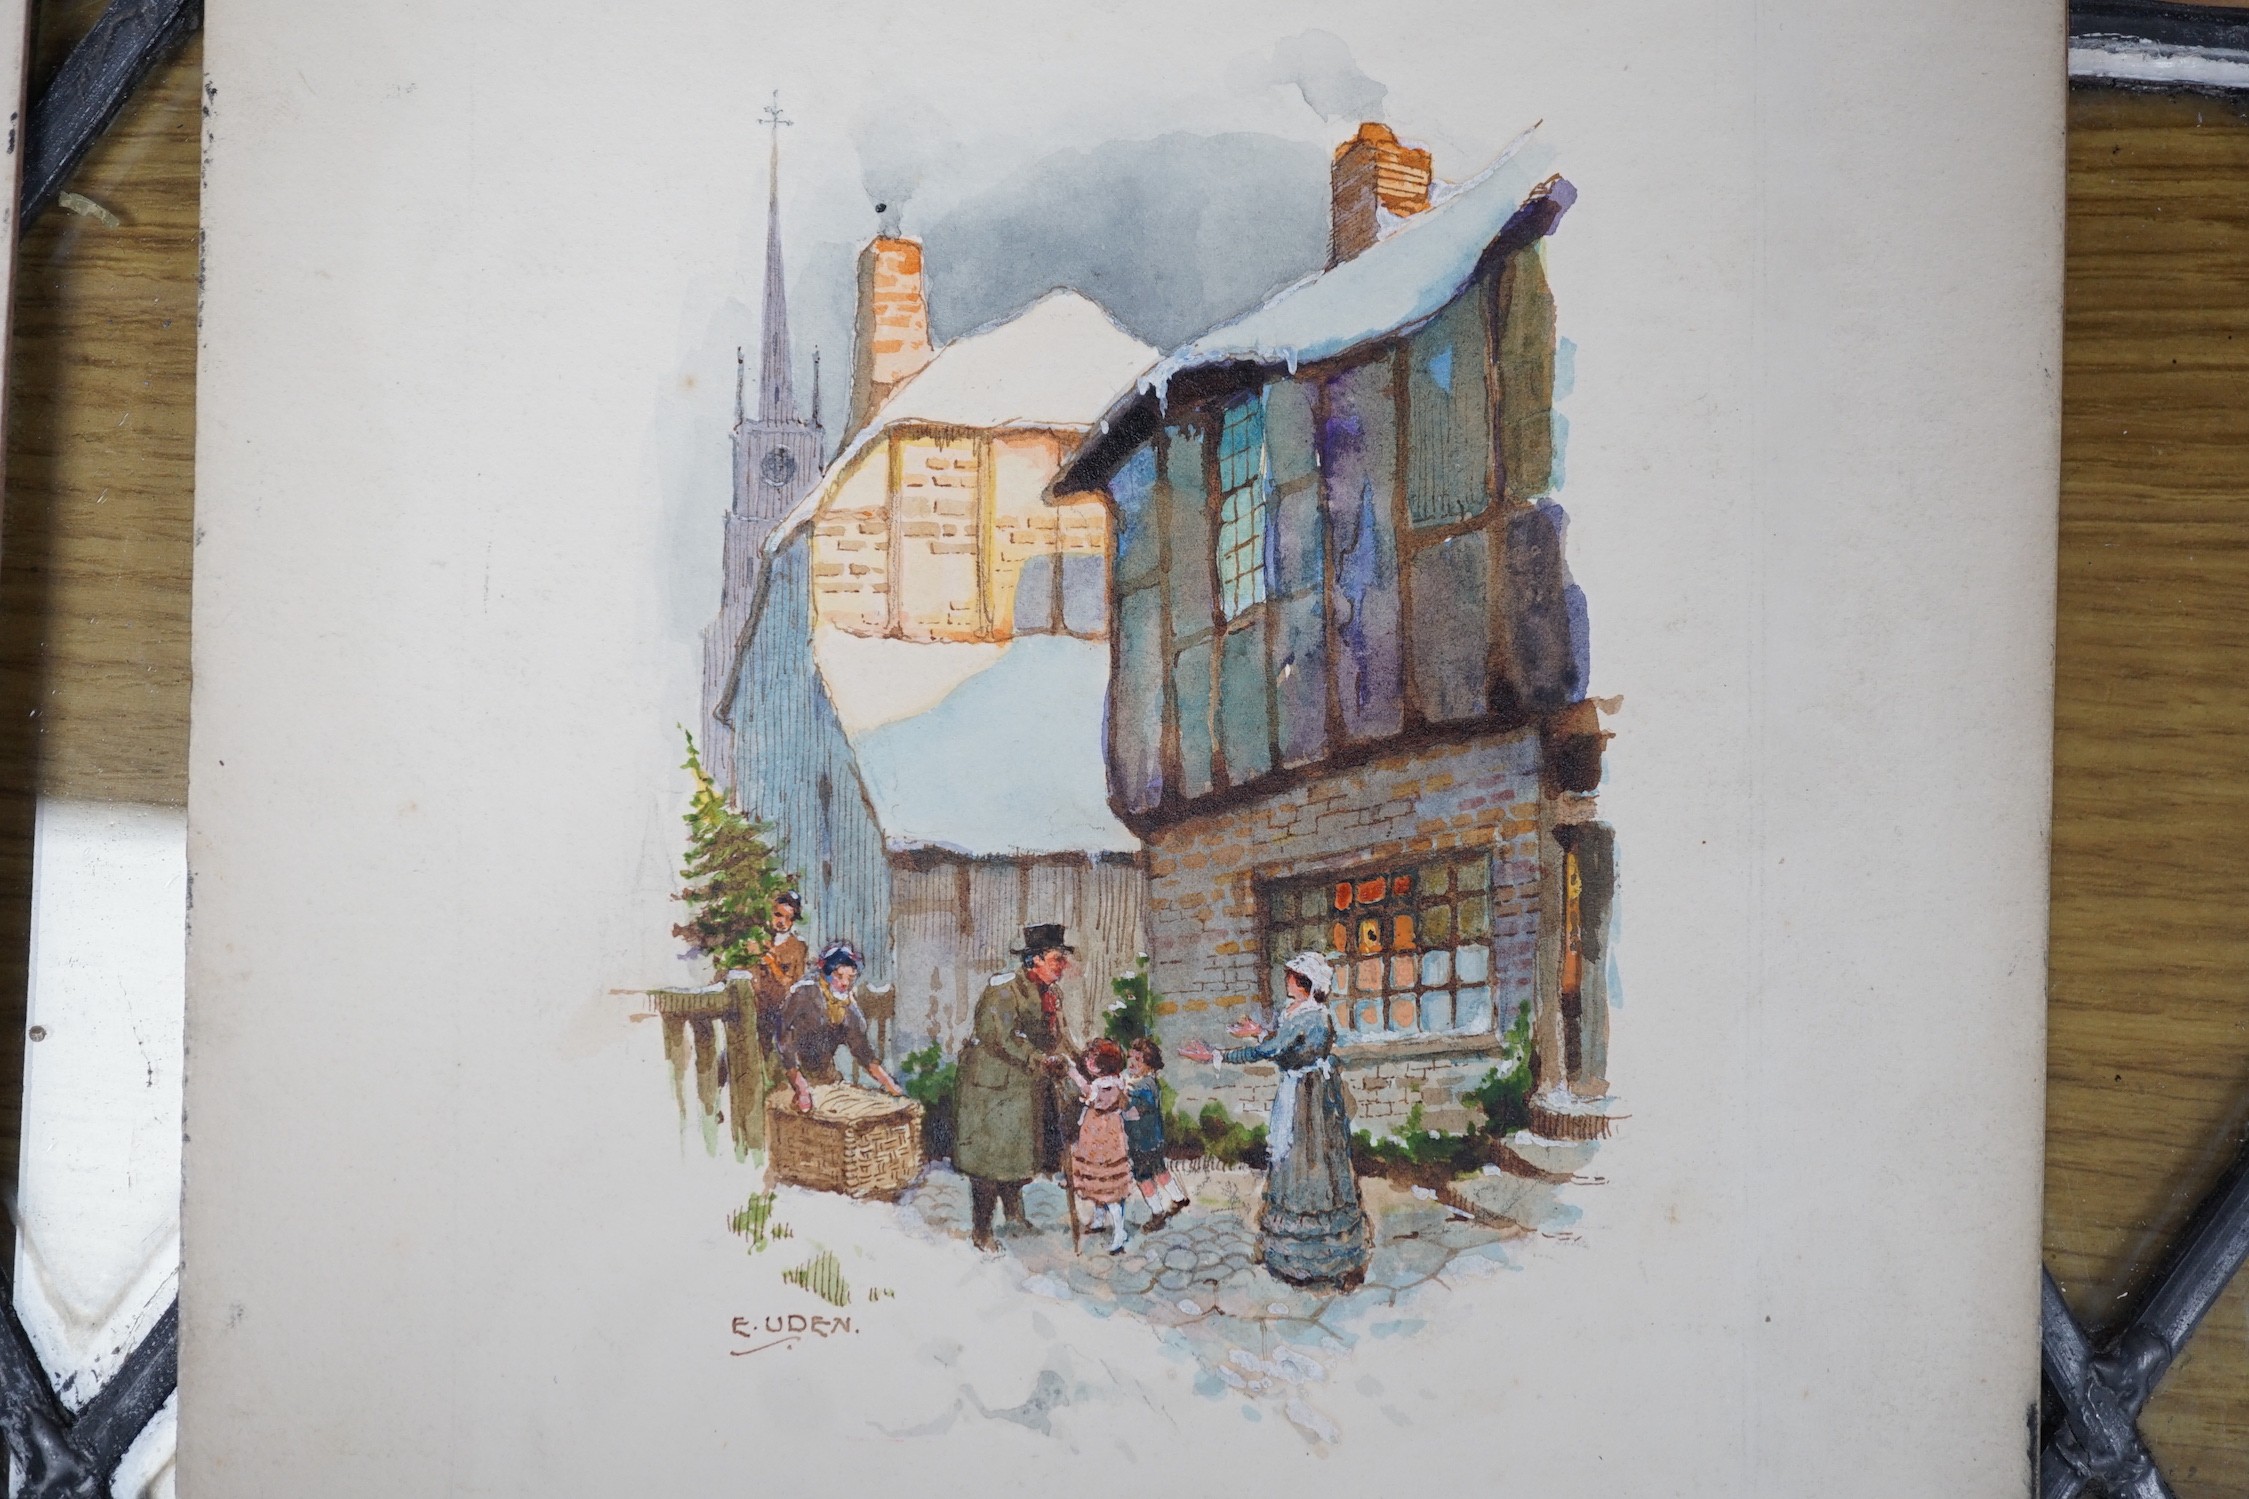 Ernest Uden (1911-1986), four watercolours with bodycolour, vintage greeting card designs, winter scenes, signed, 28 x 20cm, unframed